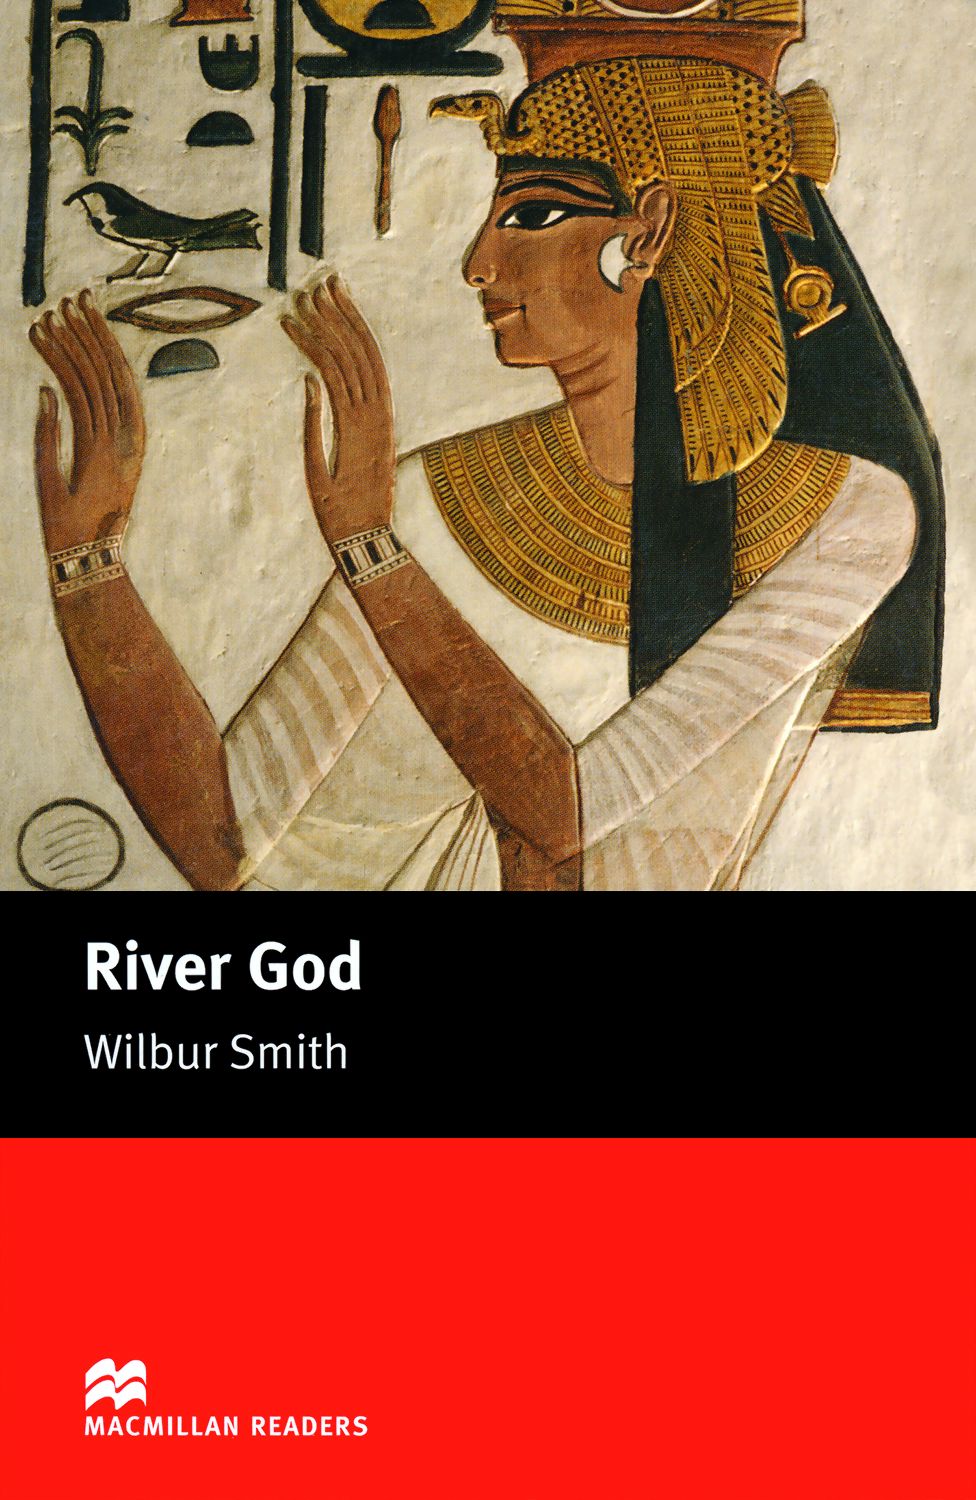 river god by wilbur smith